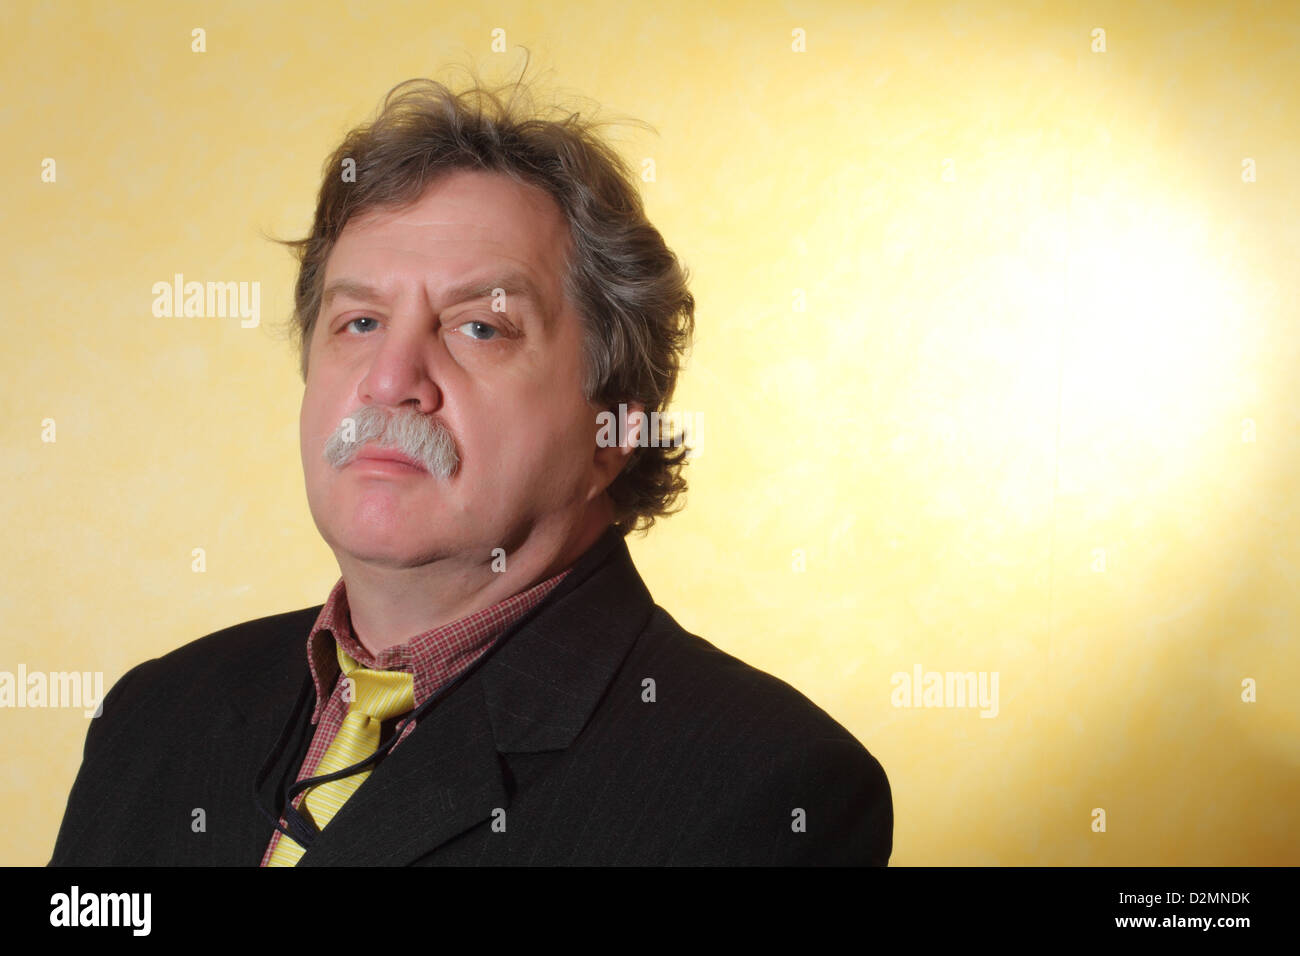 Handsome middle age business man wearing a suit on a yellow background Stock Photo